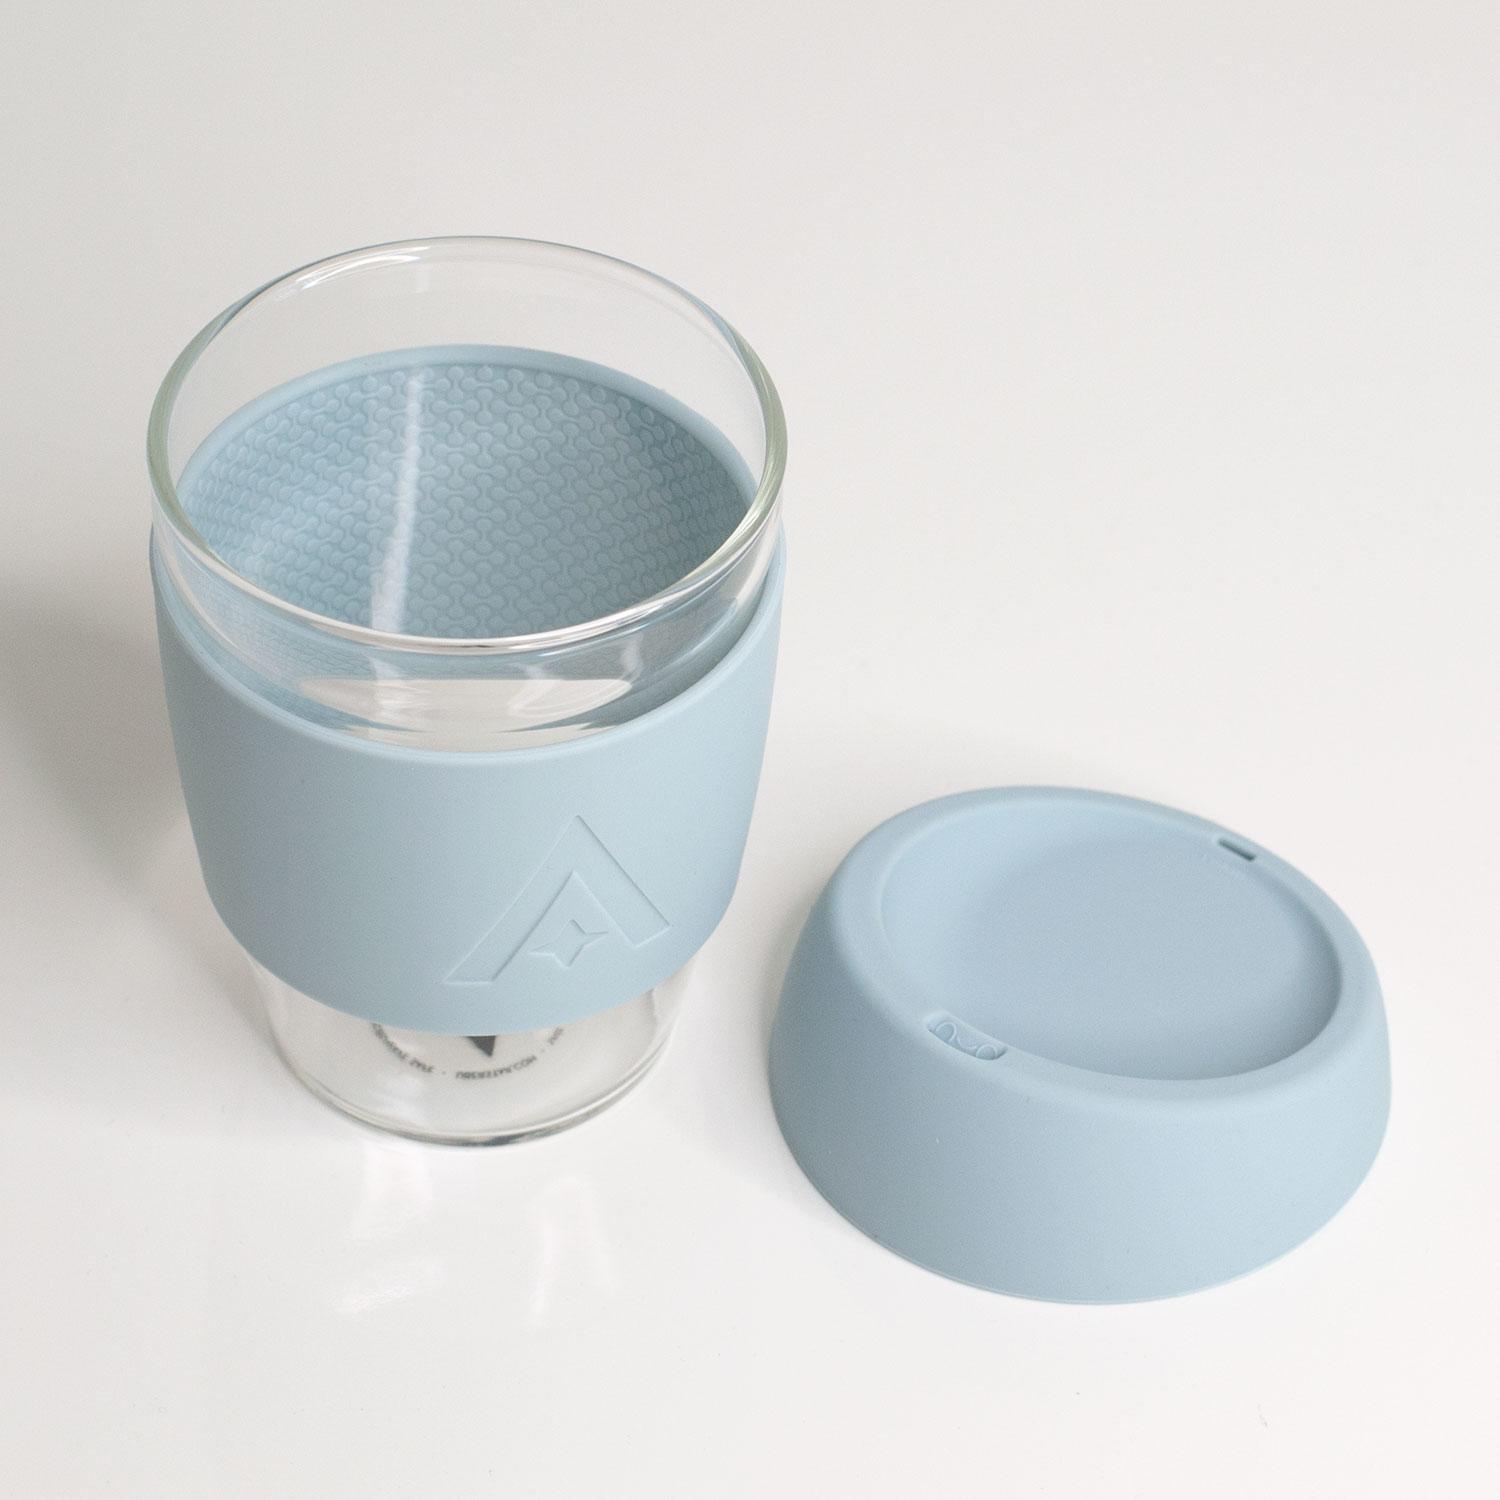 Uberstar Reusable Glass Travel Cup - Cool Blue - Only £14.99